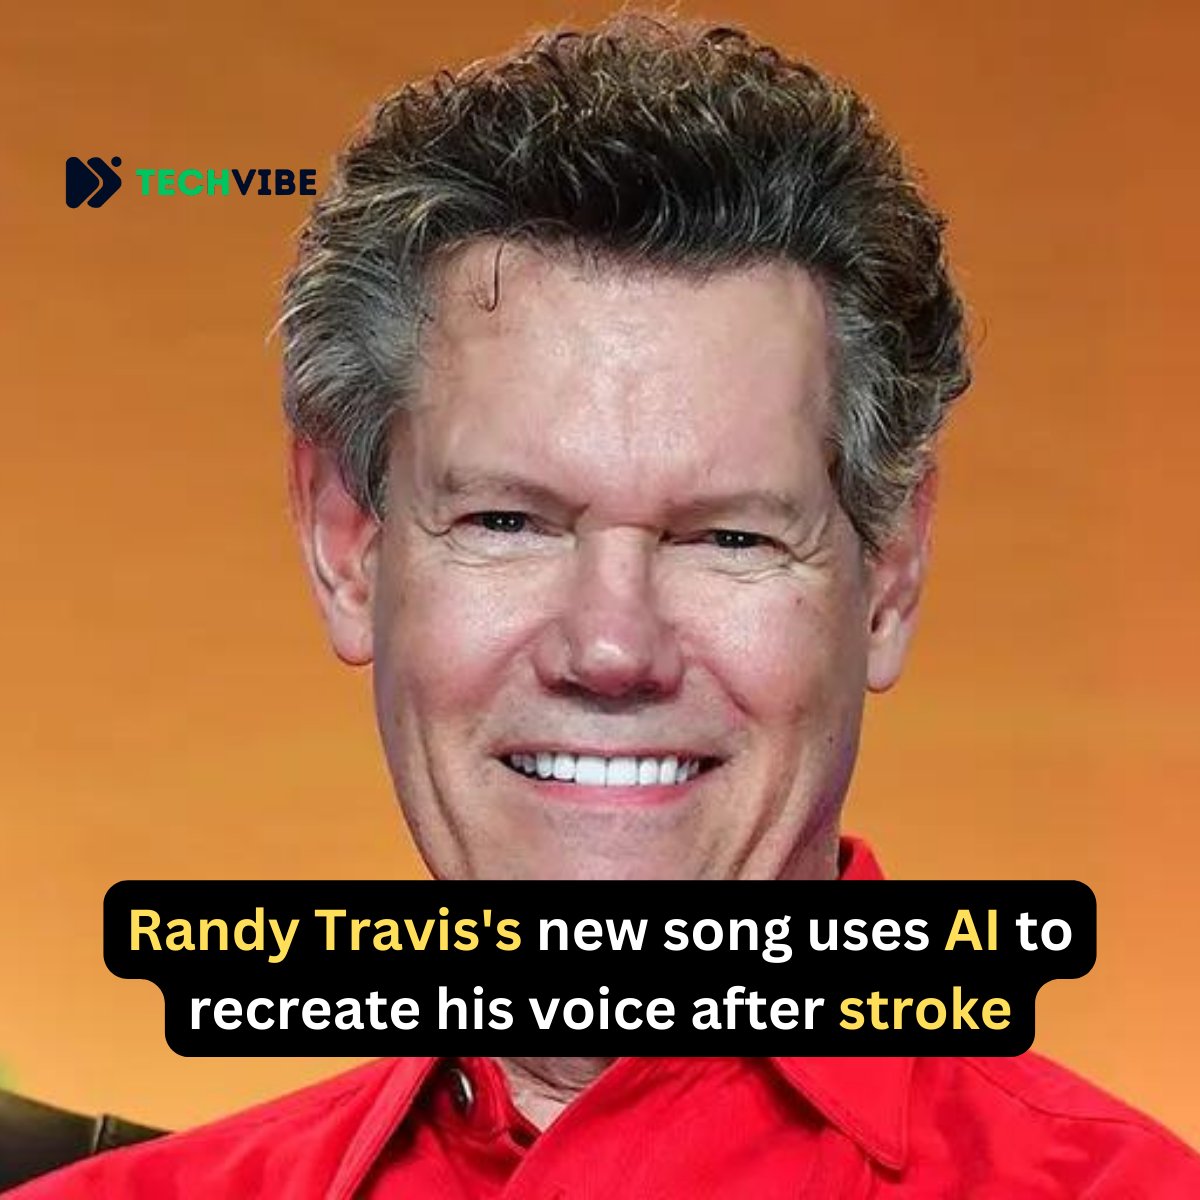 After suffering a stroke, Randy Travis's new song marks a milestone in music history, utilizing AI technology to recreate his voice for the first time in over a decade. more: t.ly/qJBba #Randitravis #AI #AInews